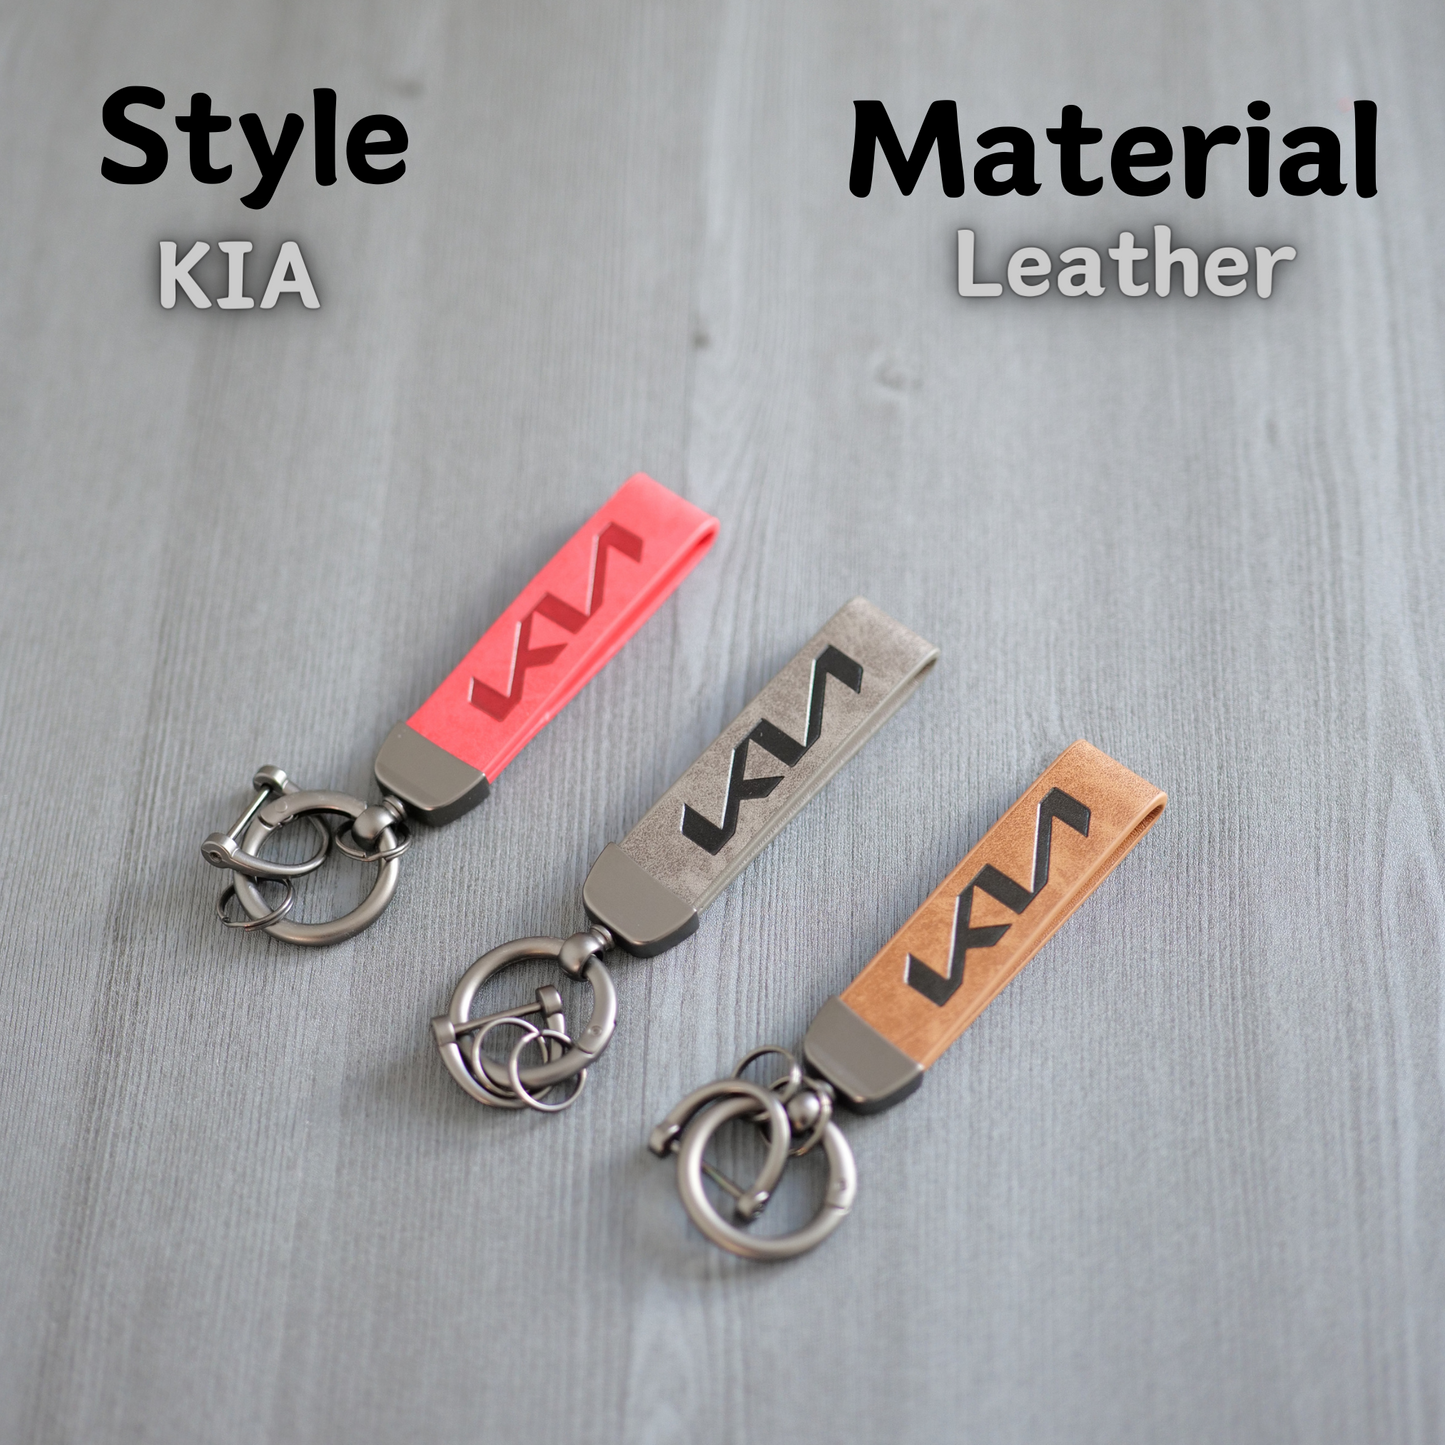 Keychains for GT|GT-Line|N-Line|N|KDM|Kia Vehicles | Perfect Gift for Kia Owners